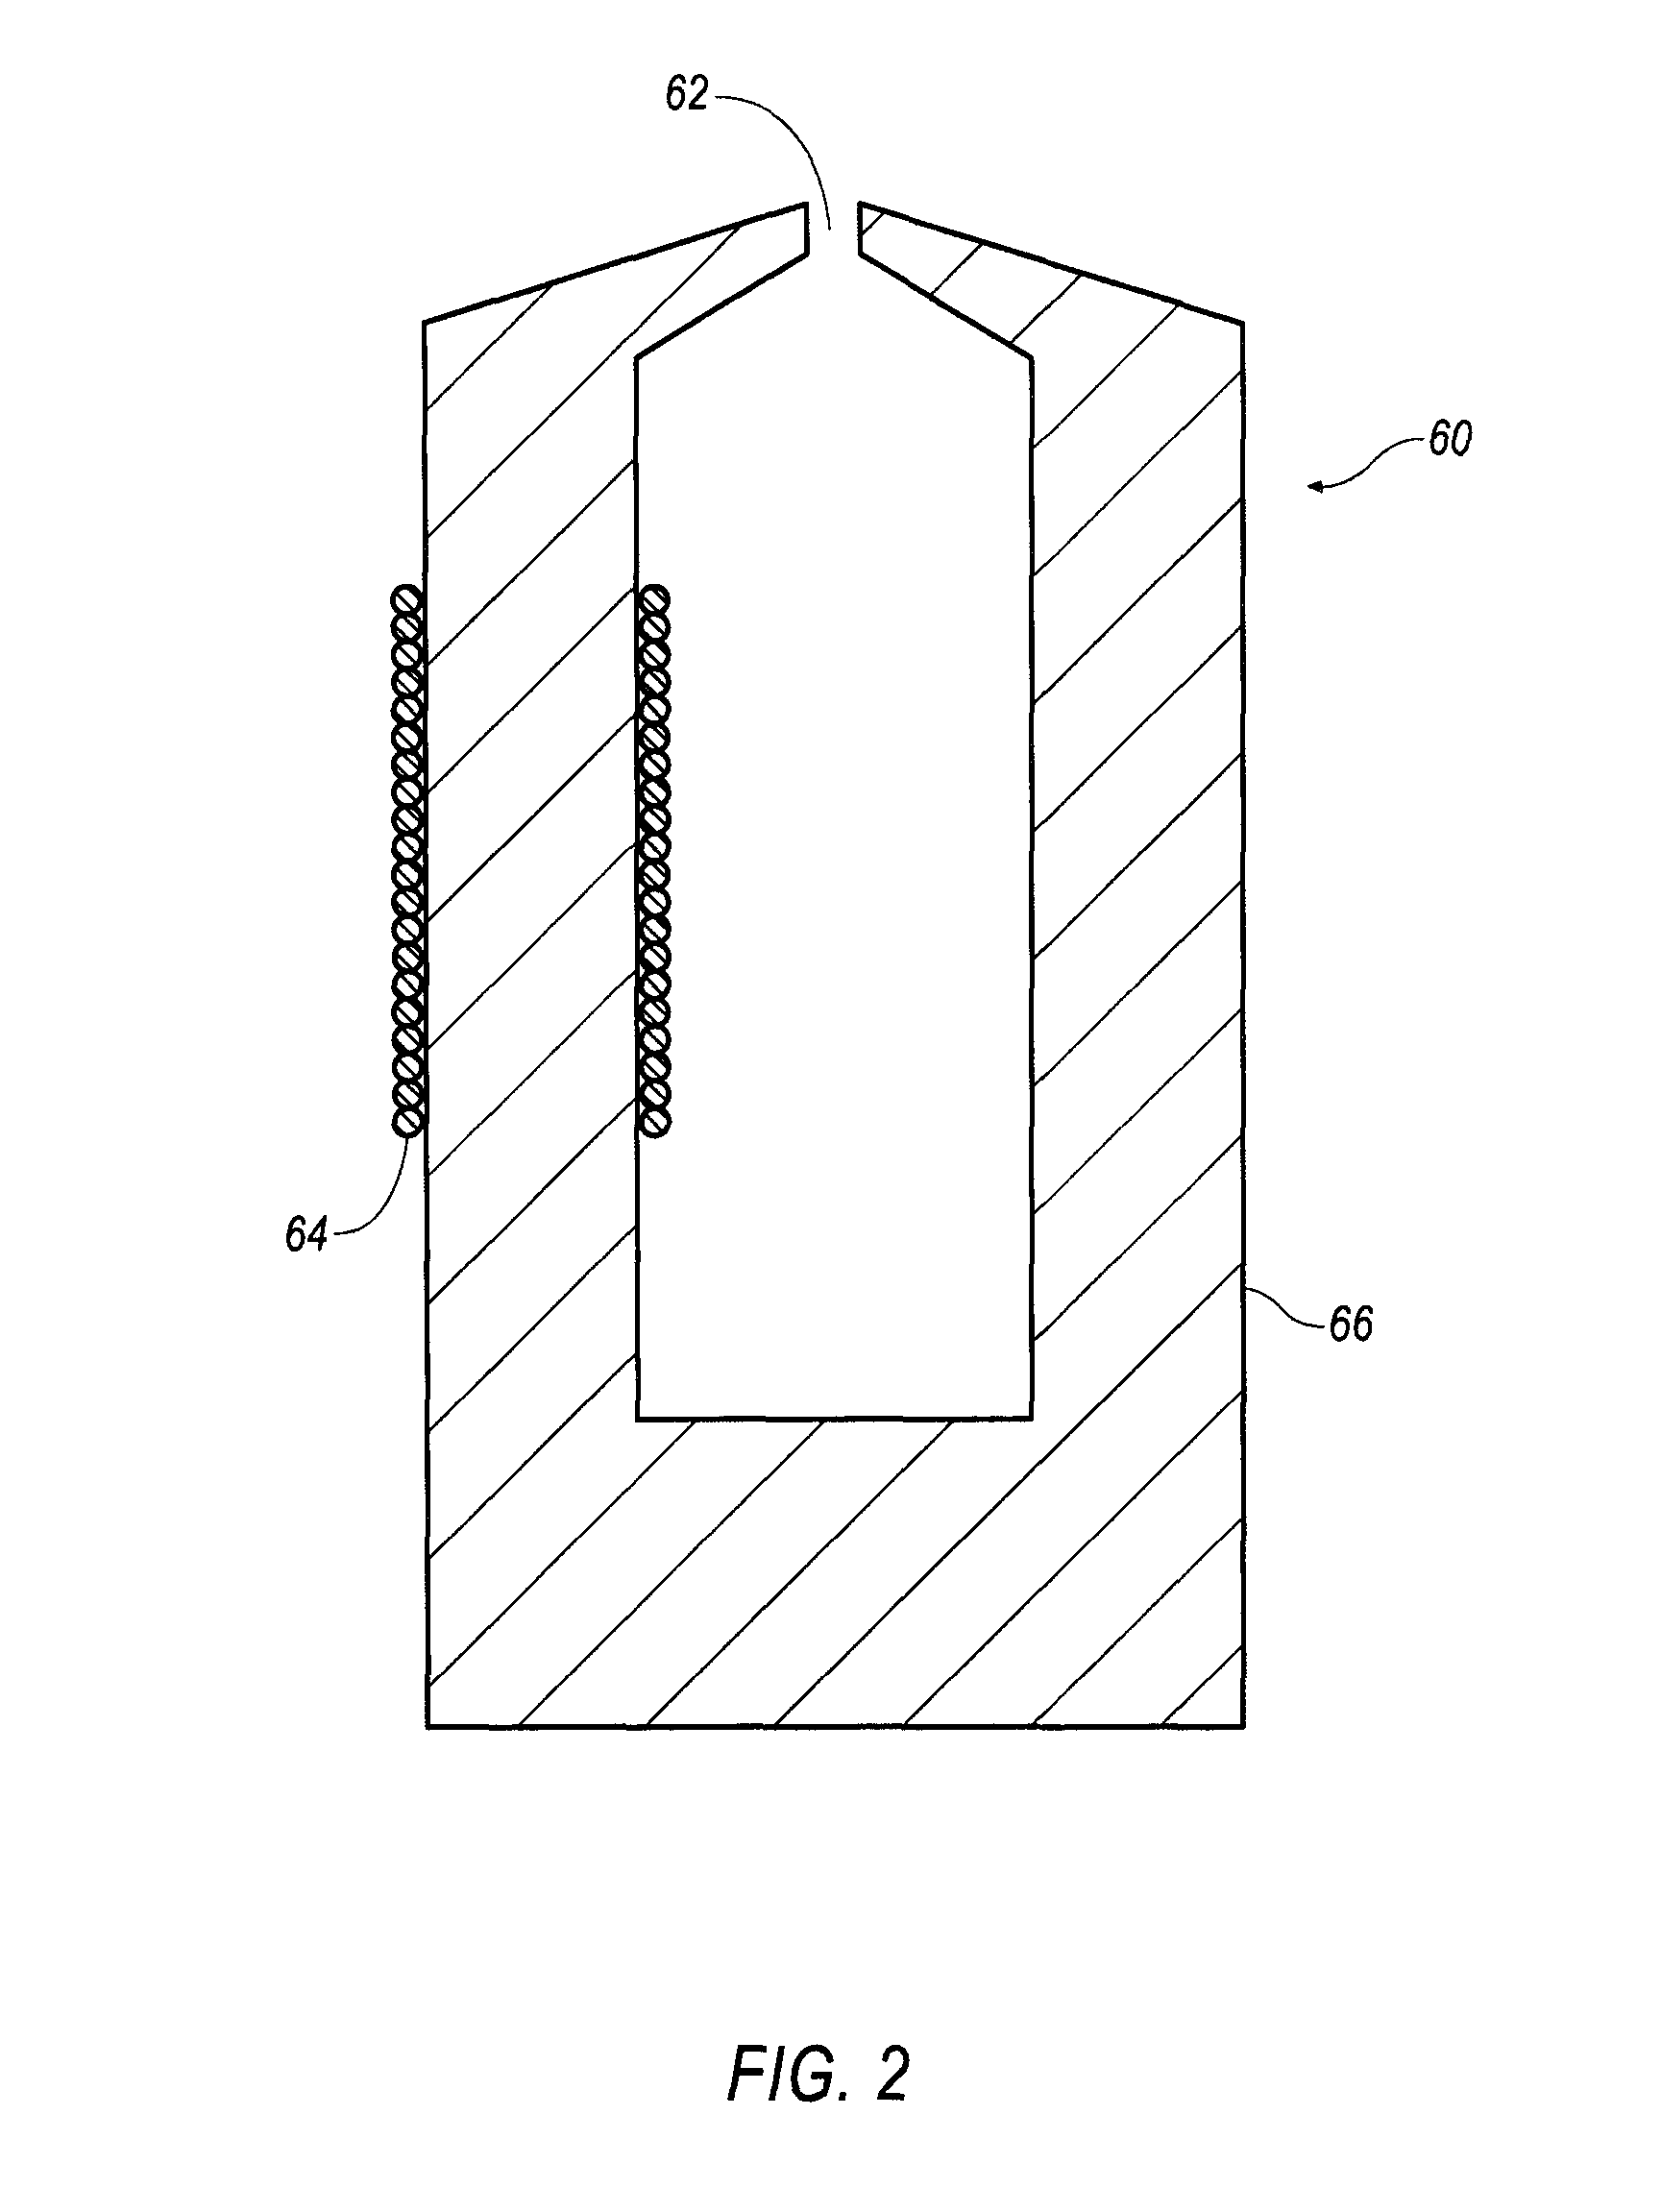 Hand-operated document reader/imager with document retention device including manually-powered anti-skew methodology